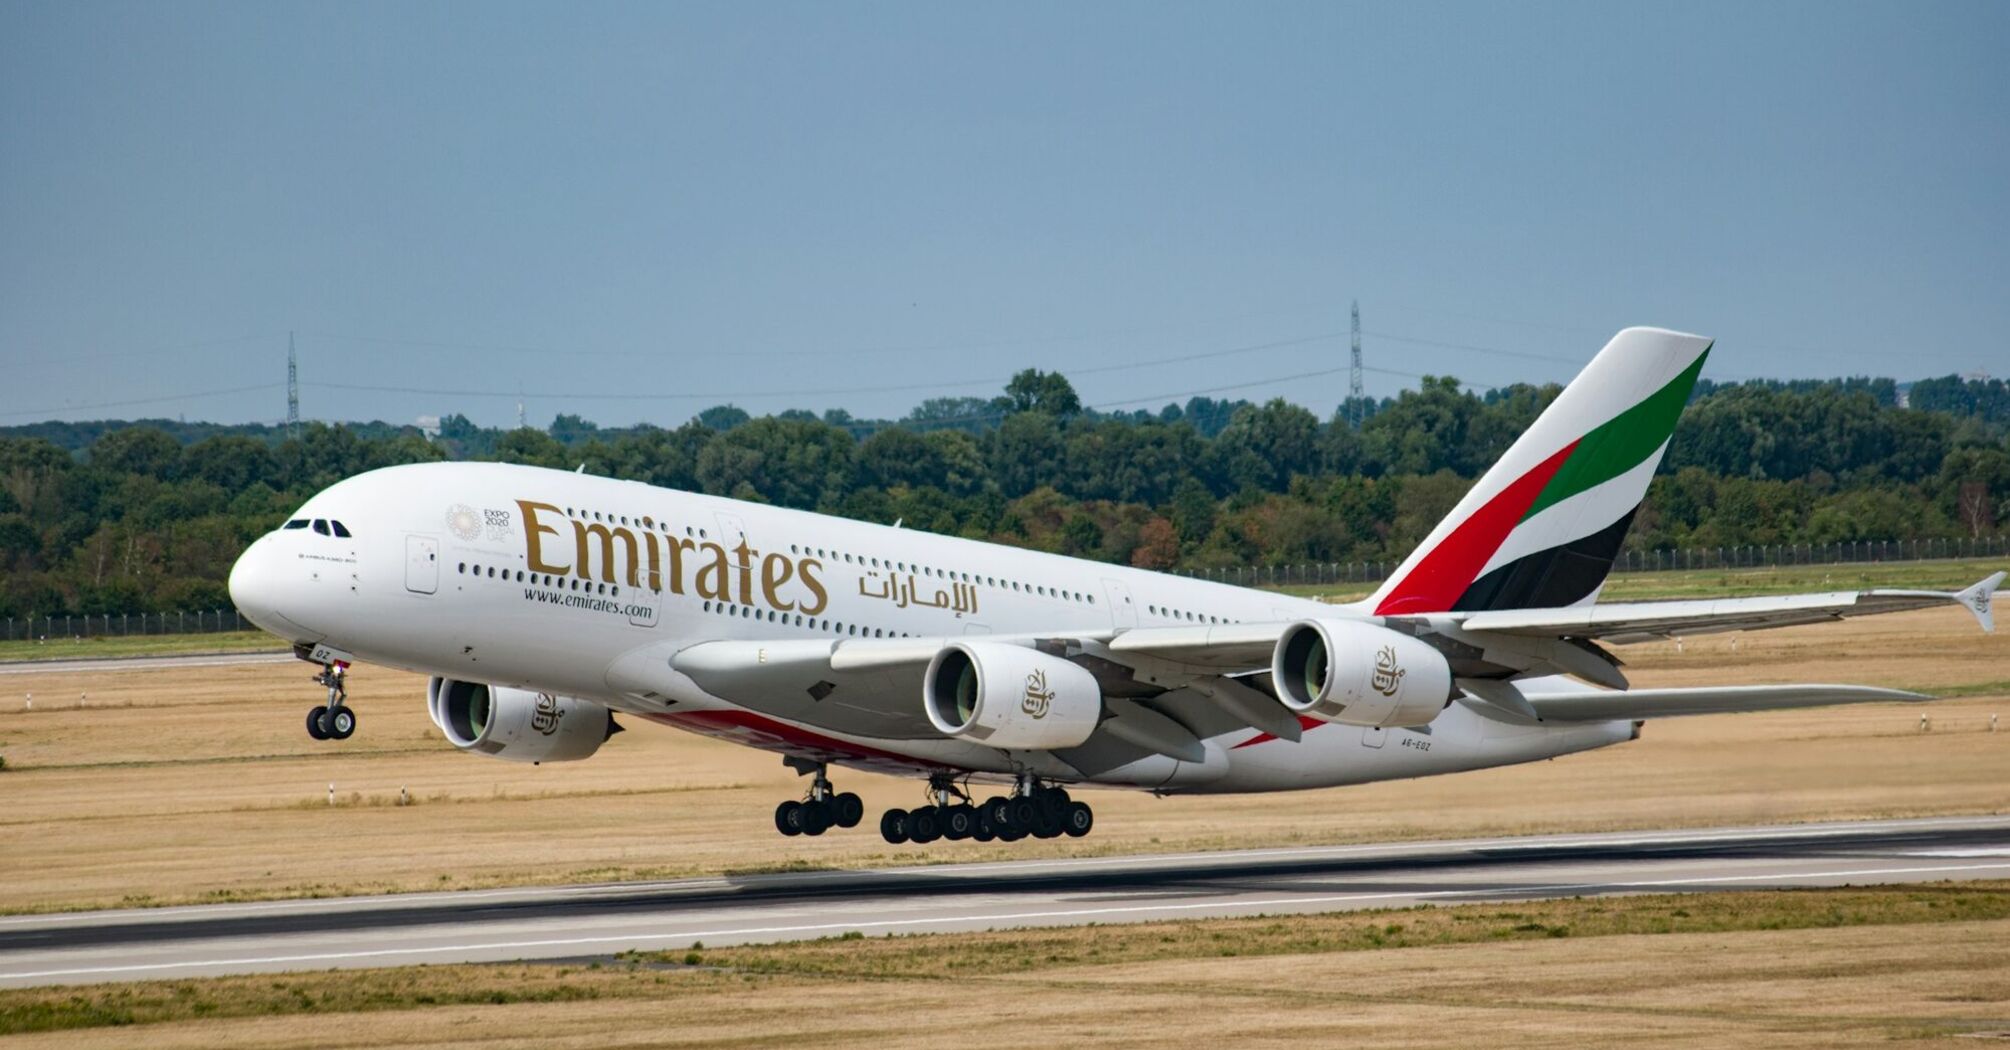 Emirates airplane taking off on a sunny day